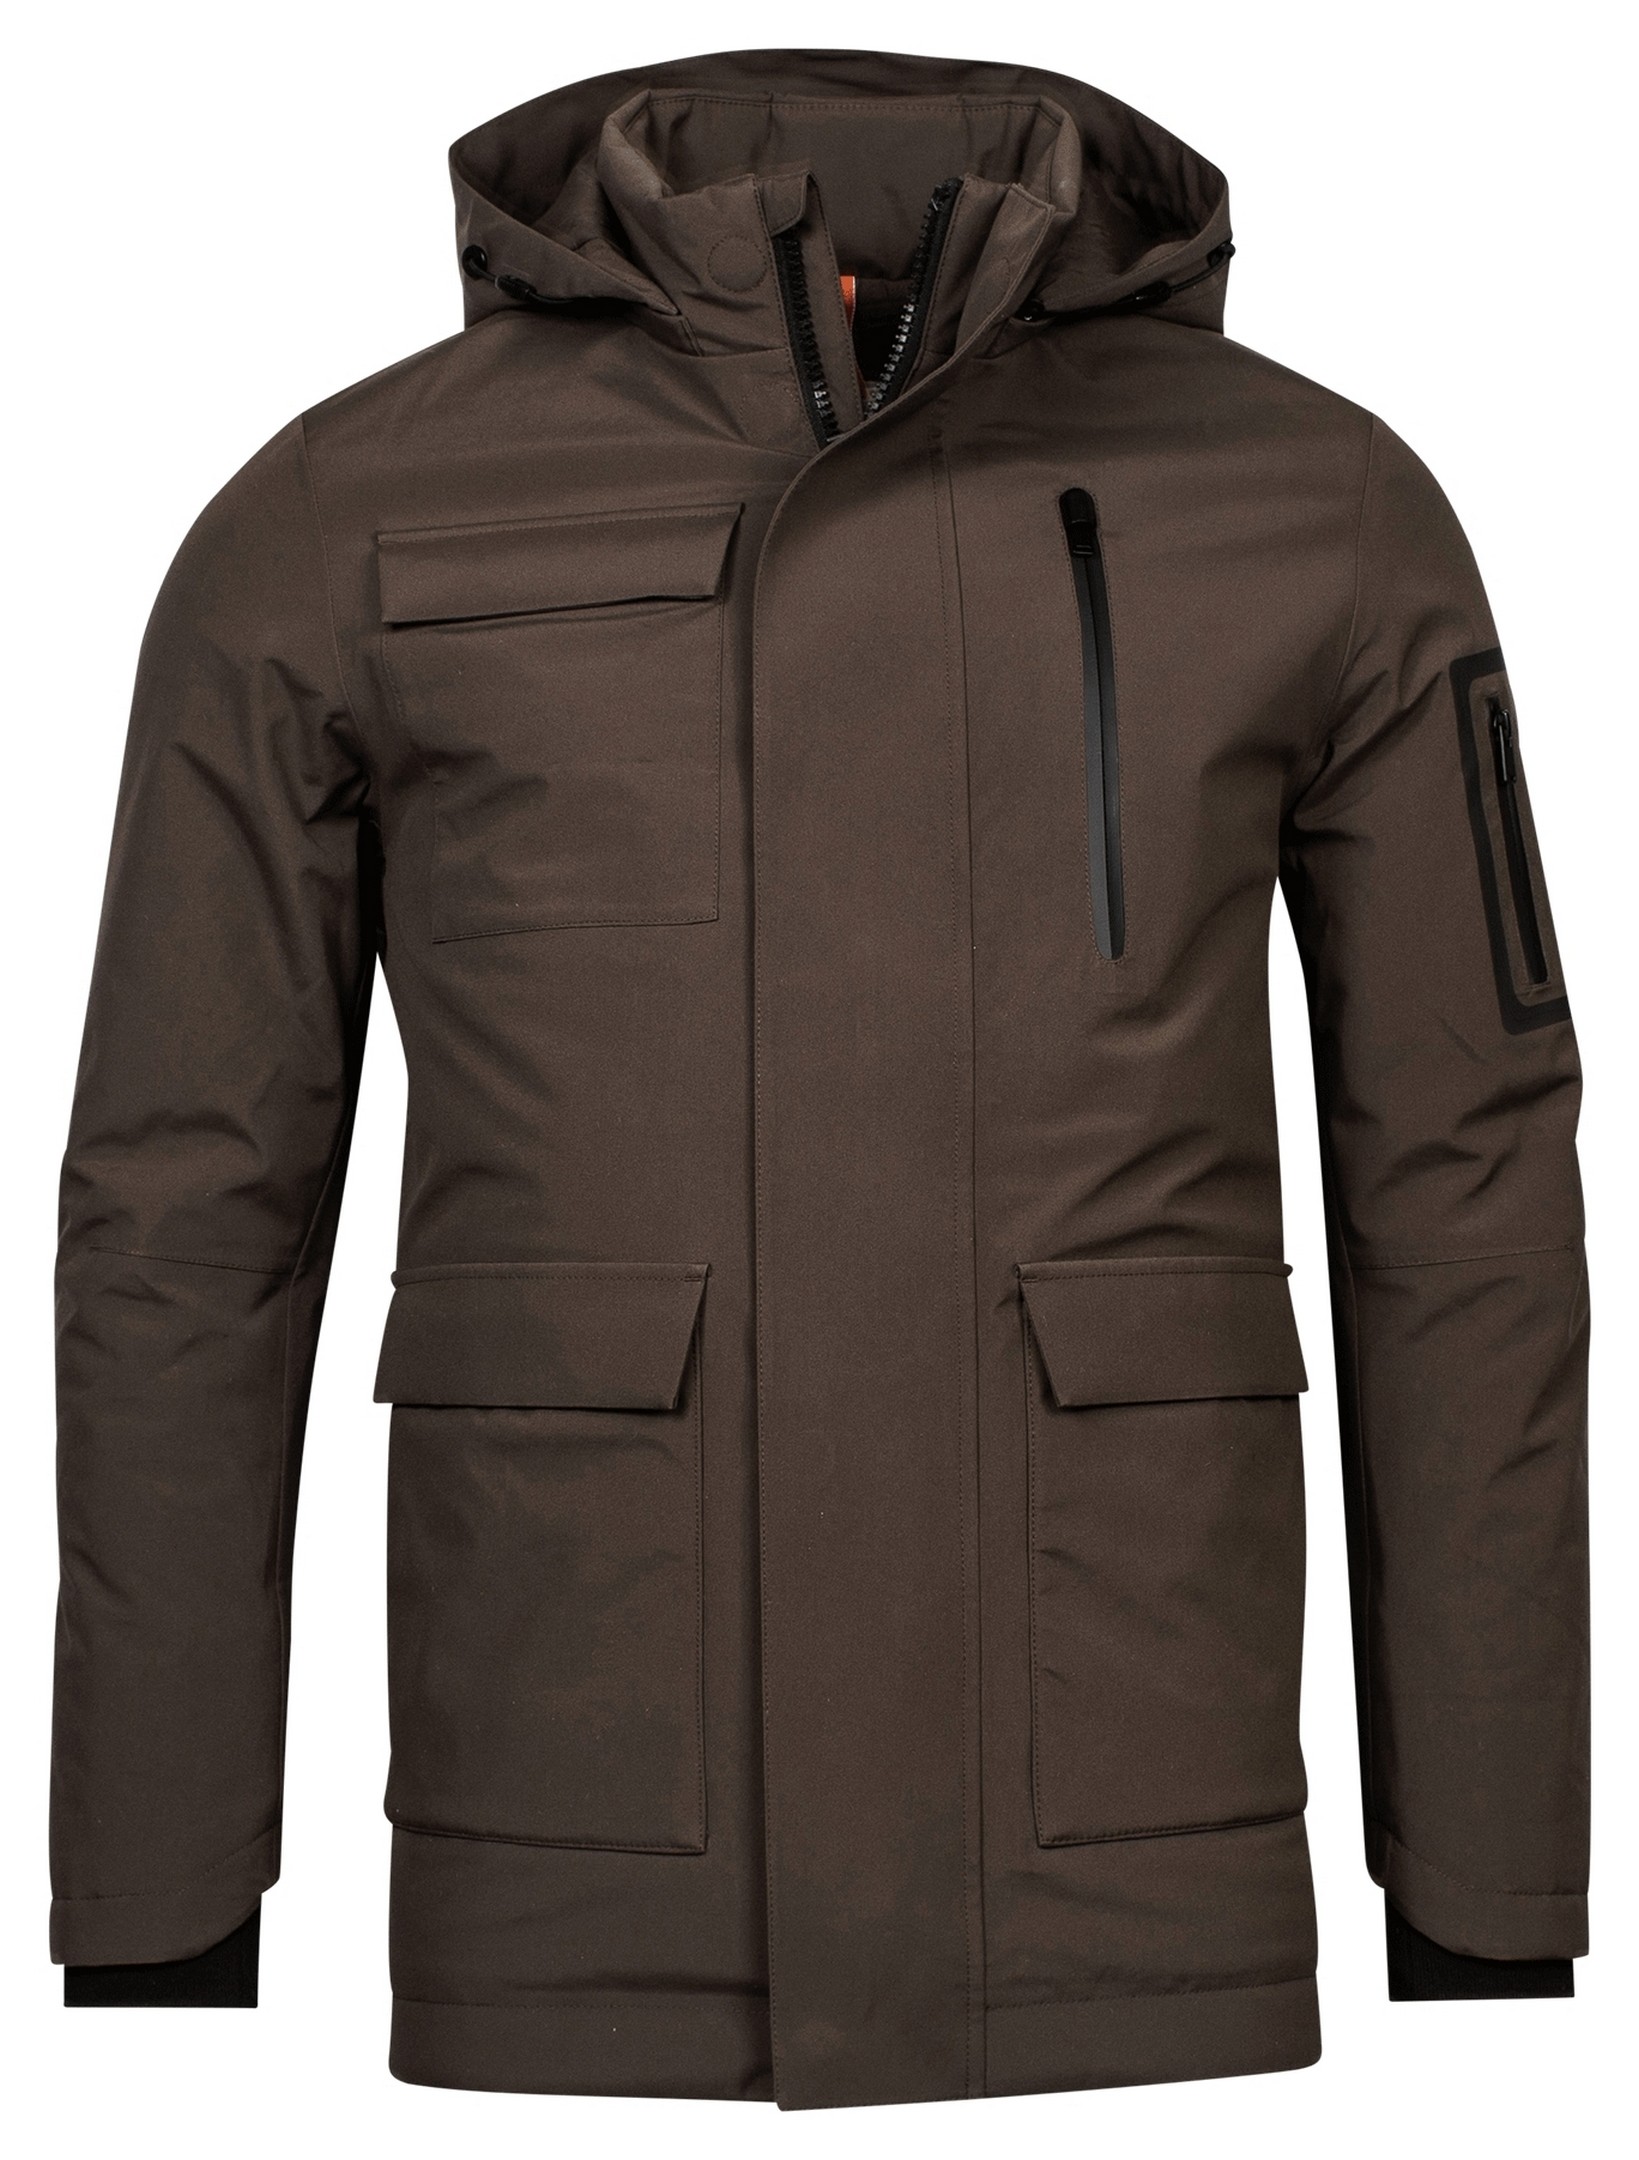 Giordano Jacket Removeable Hood Water and Windproof Fabric Dark Navy | Jan  Rozing Men's Fashion